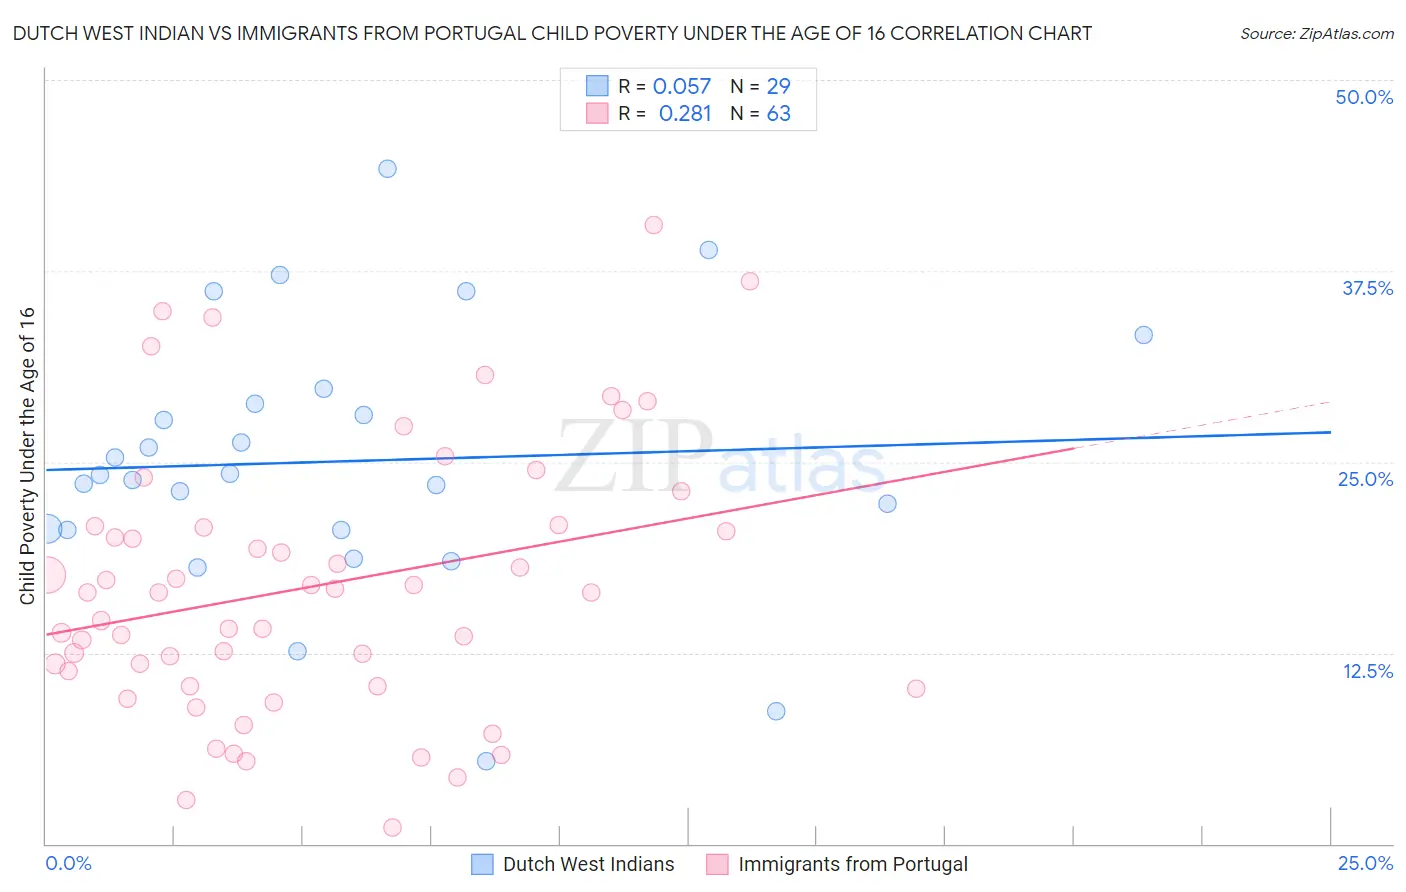 Dutch West Indian vs Immigrants from Portugal Child Poverty Under the Age of 16